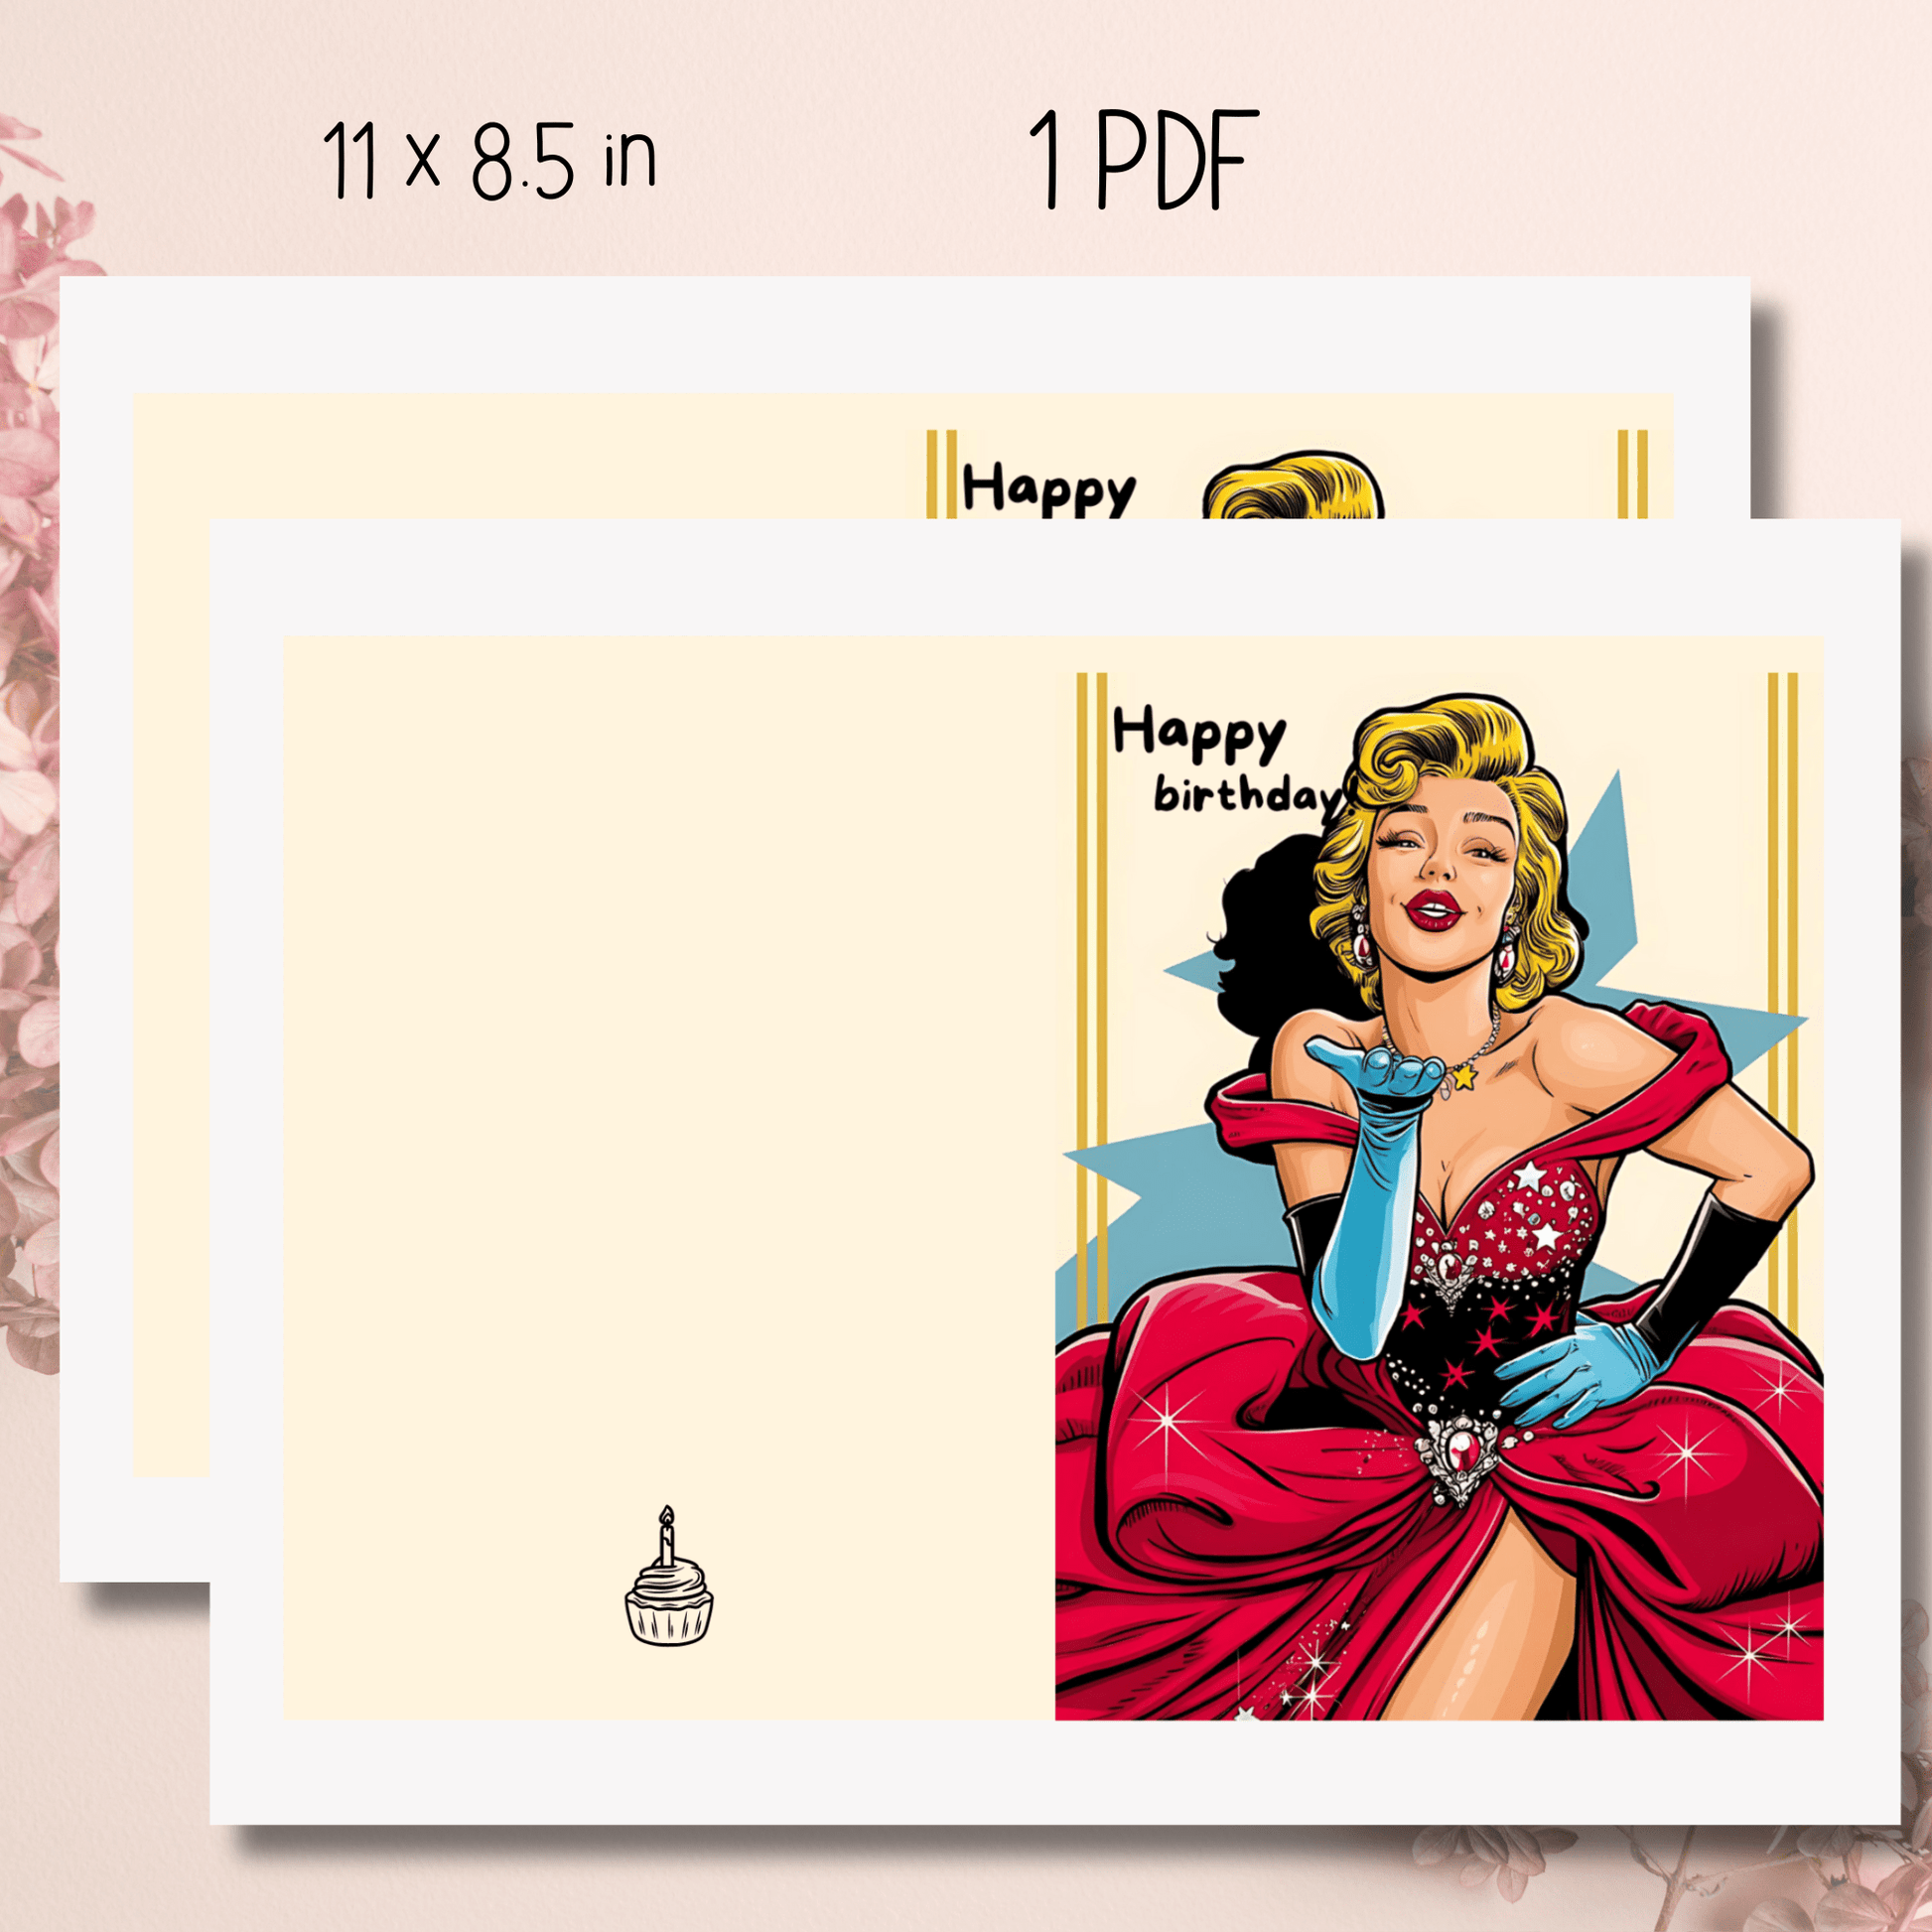 printed PDF sheet of birthday greeting card for download